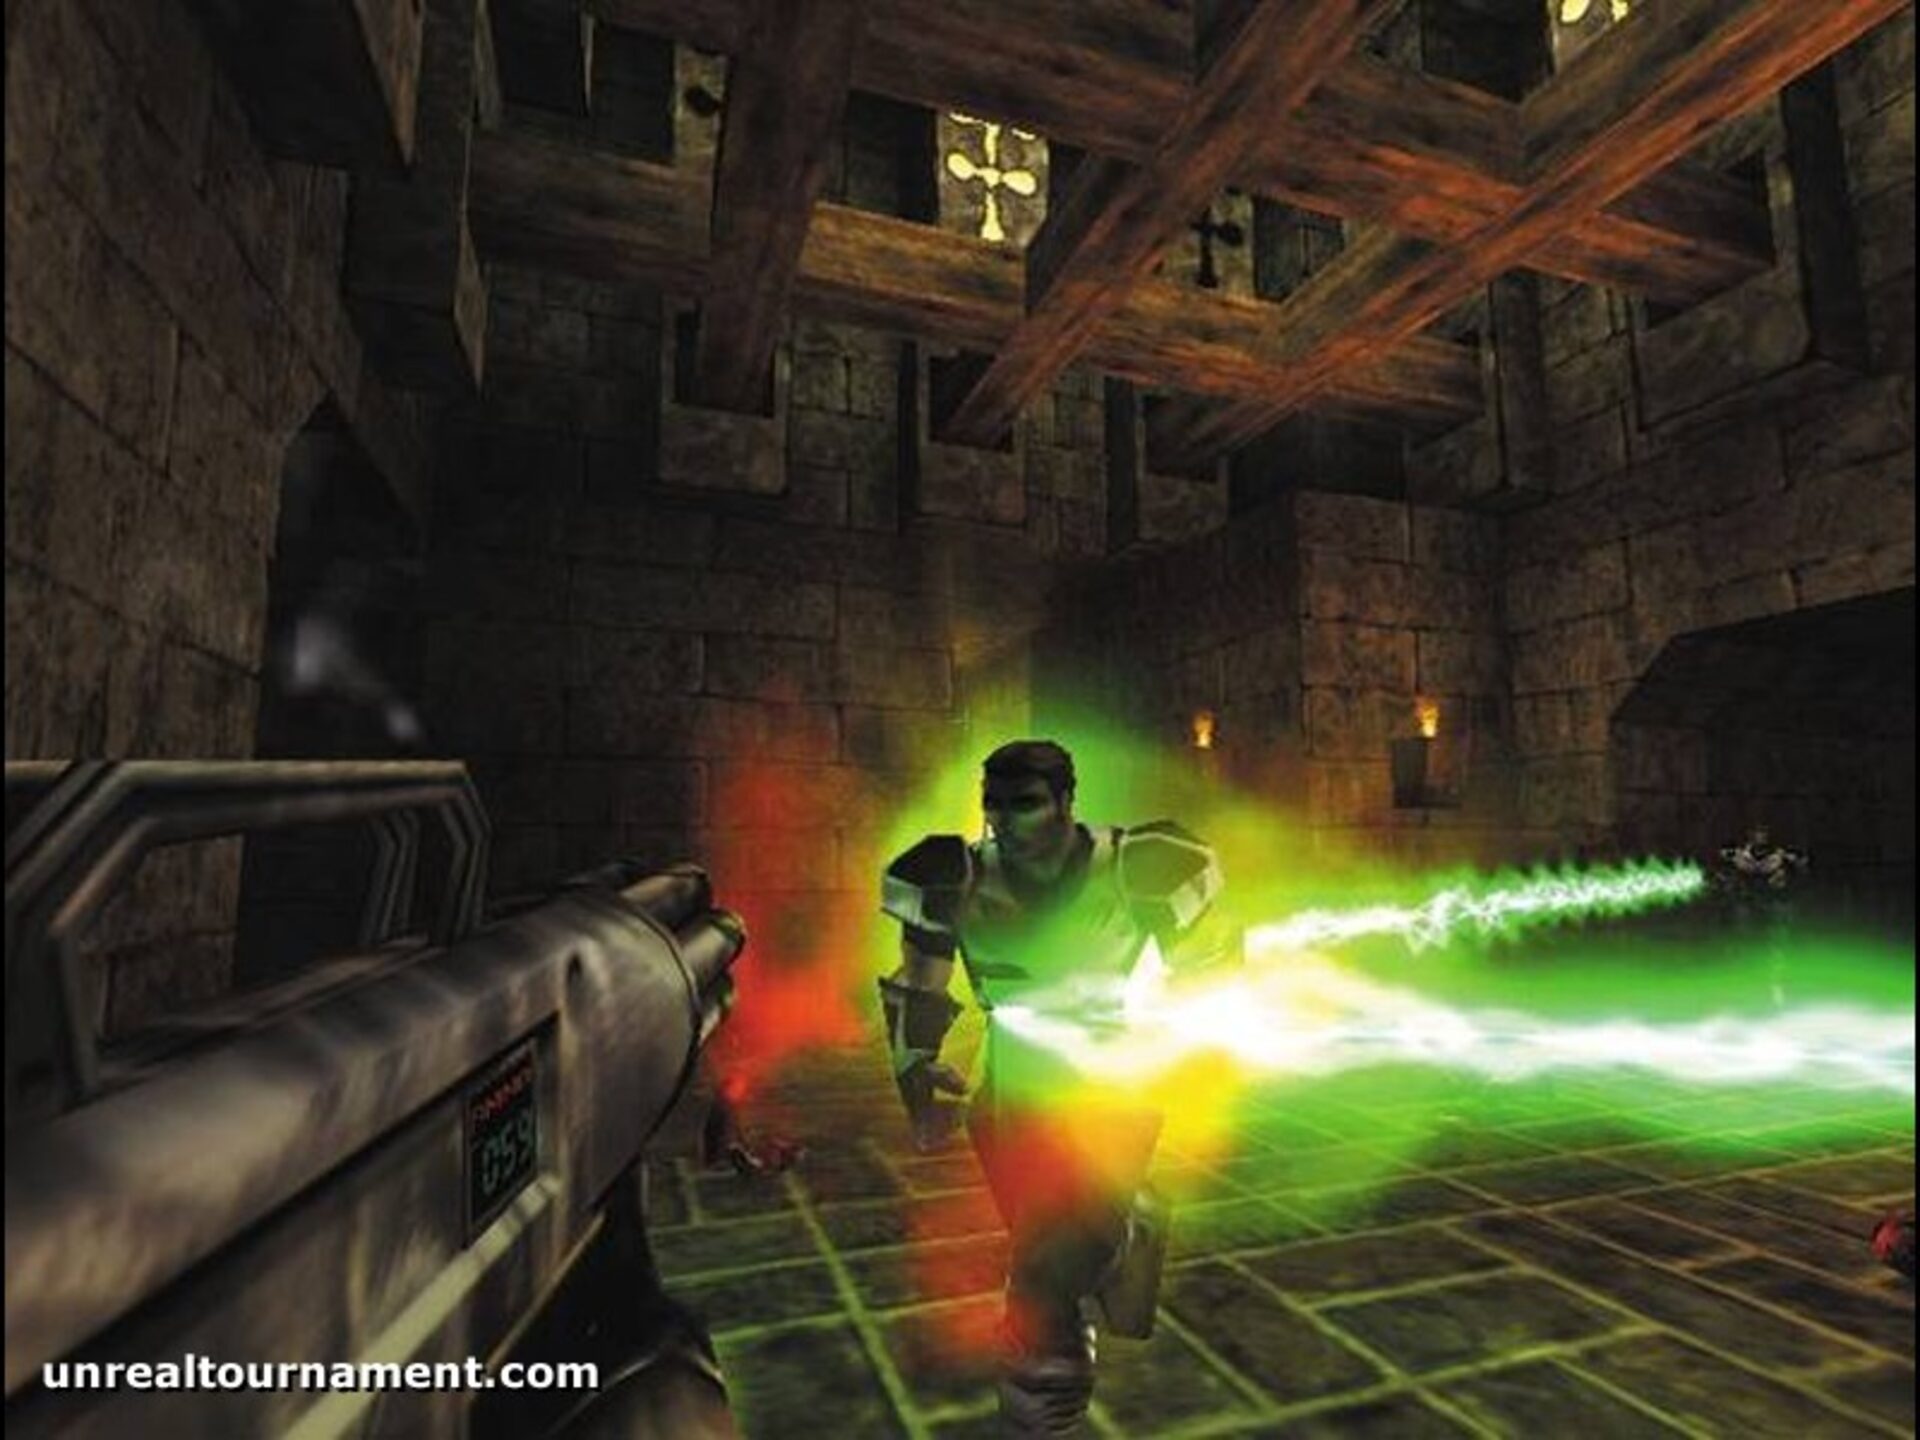 Unreal tournament for steam фото 50